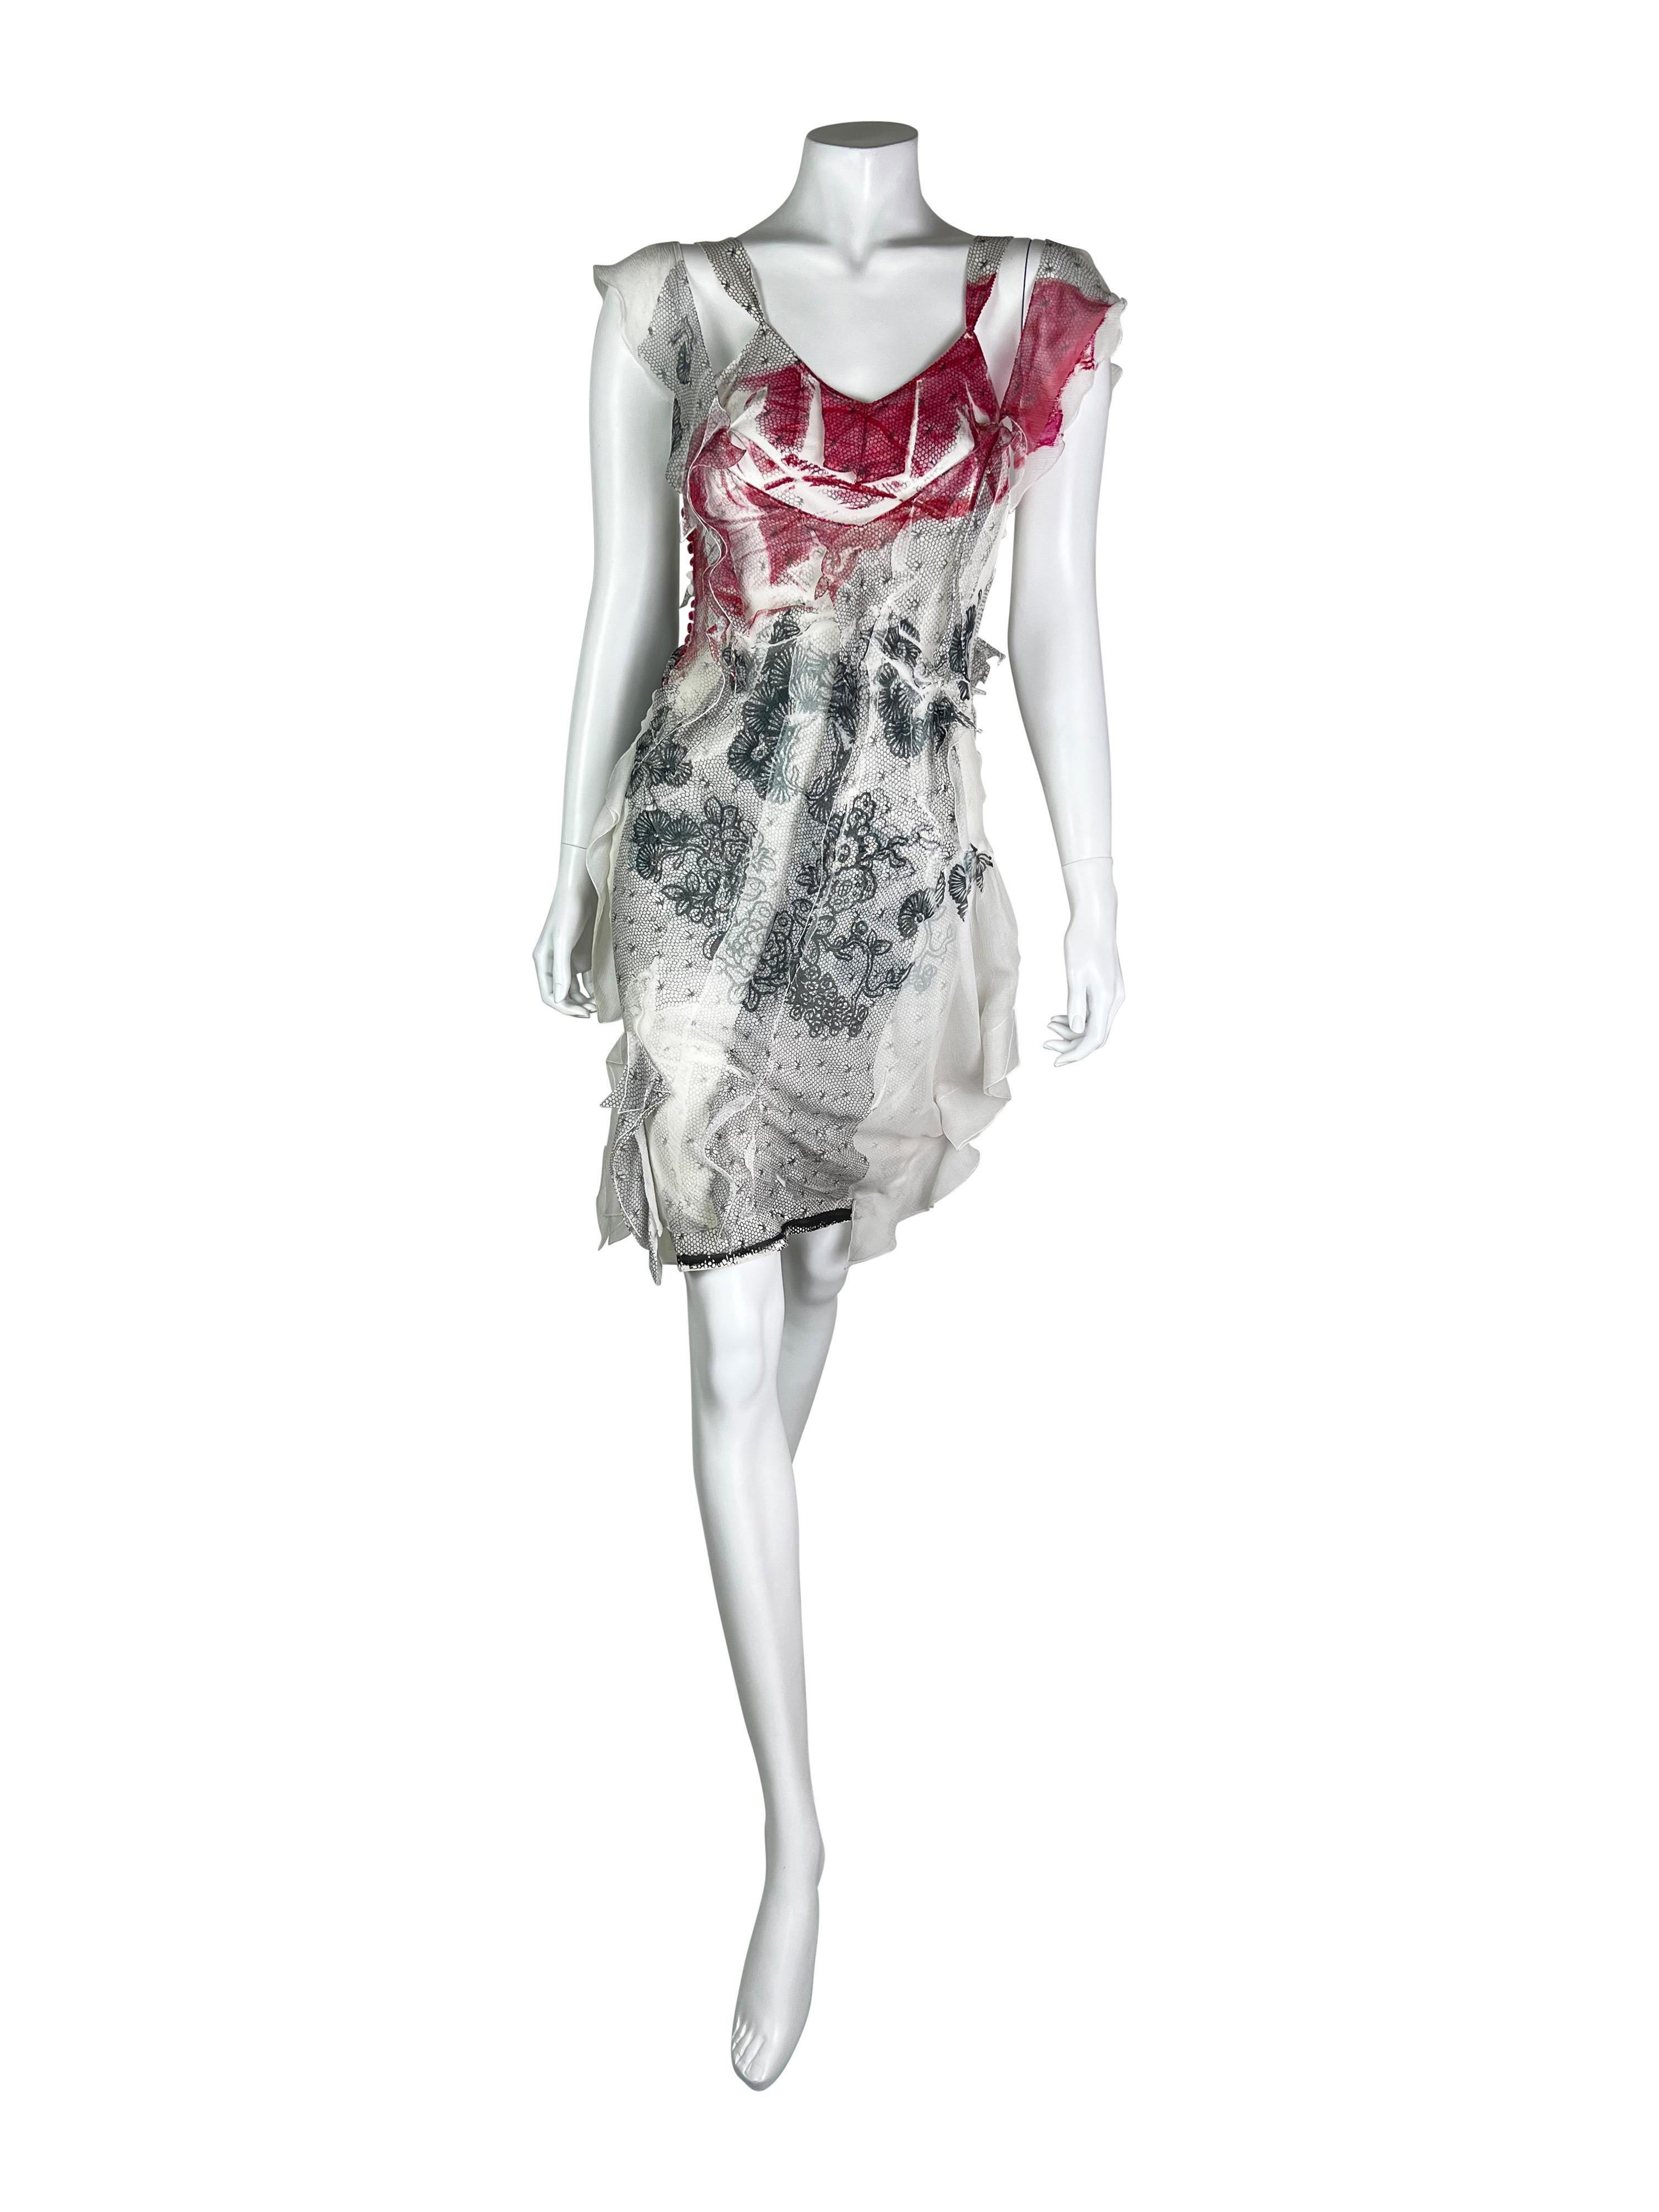 A beautiful layered silk mini dress with a stamped lace print.

Size and composition label is missing, the fit corresponds to FR 36, or XS/S.

Measurements (flay lay on one side):

Armpit to armpit - 41 cm (16 in)
Waist - 33 cm (13 in)
Hips - 46 cm